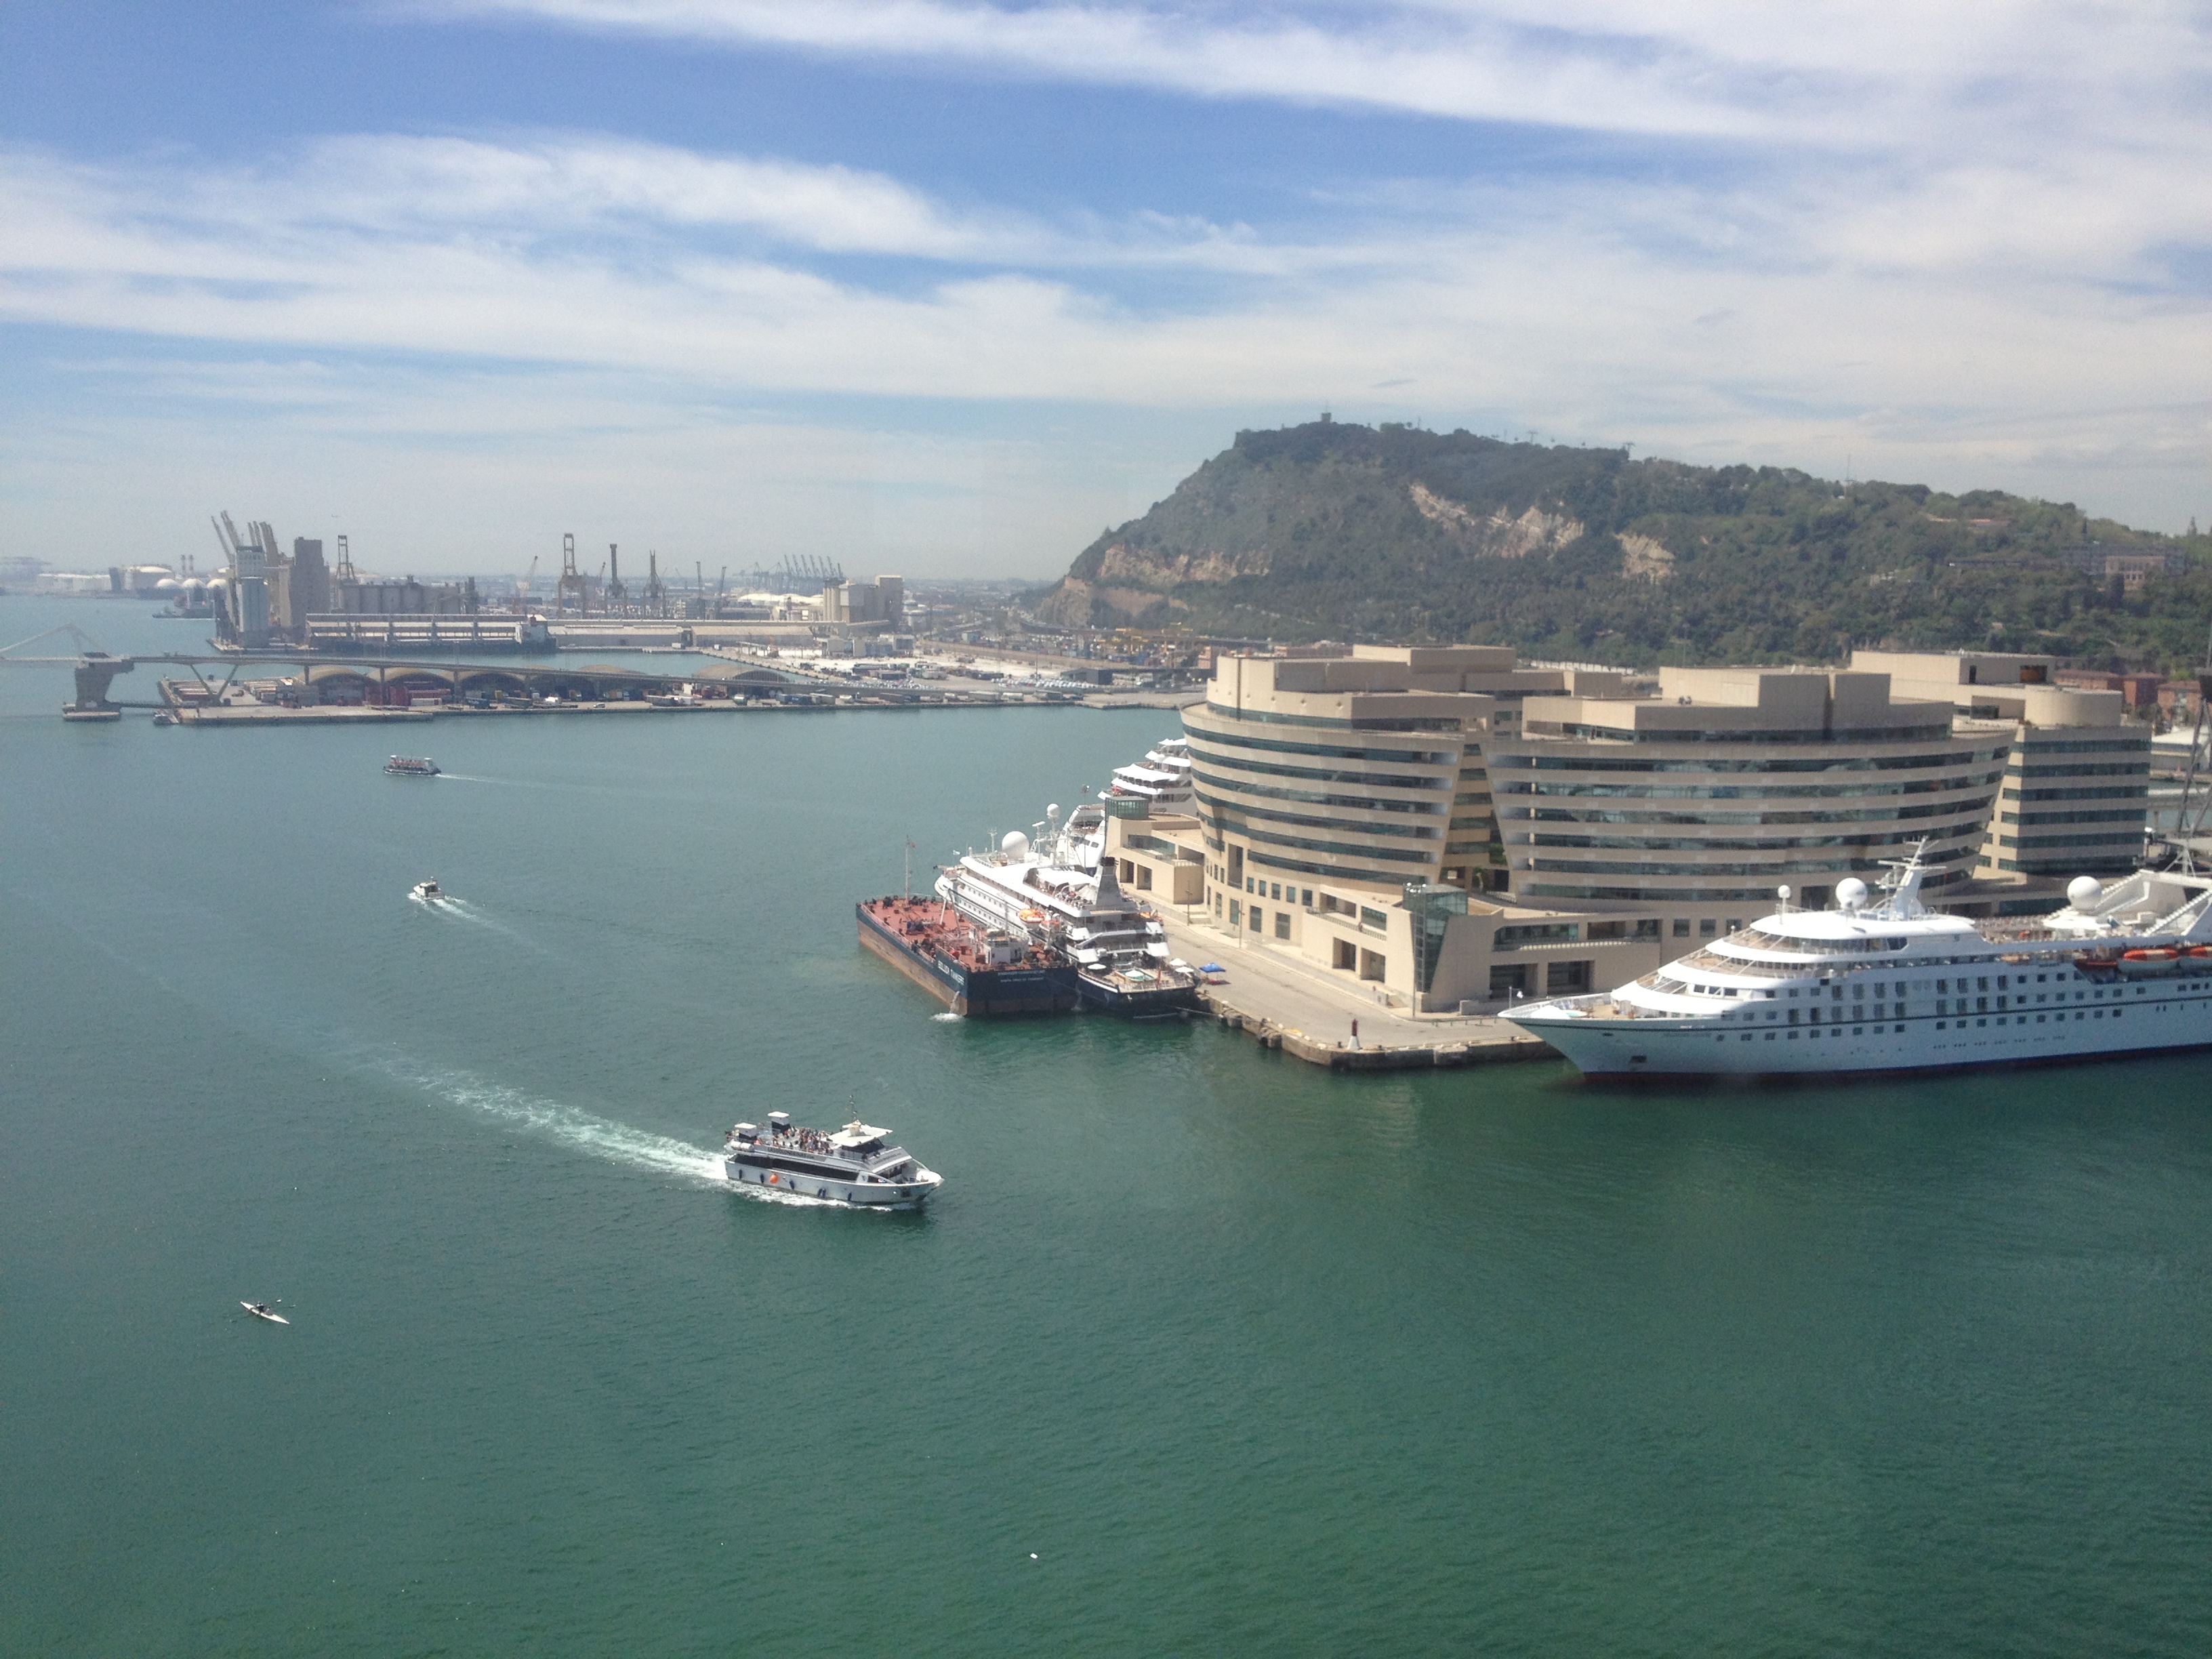 View of boats from Barcelona aerial tram